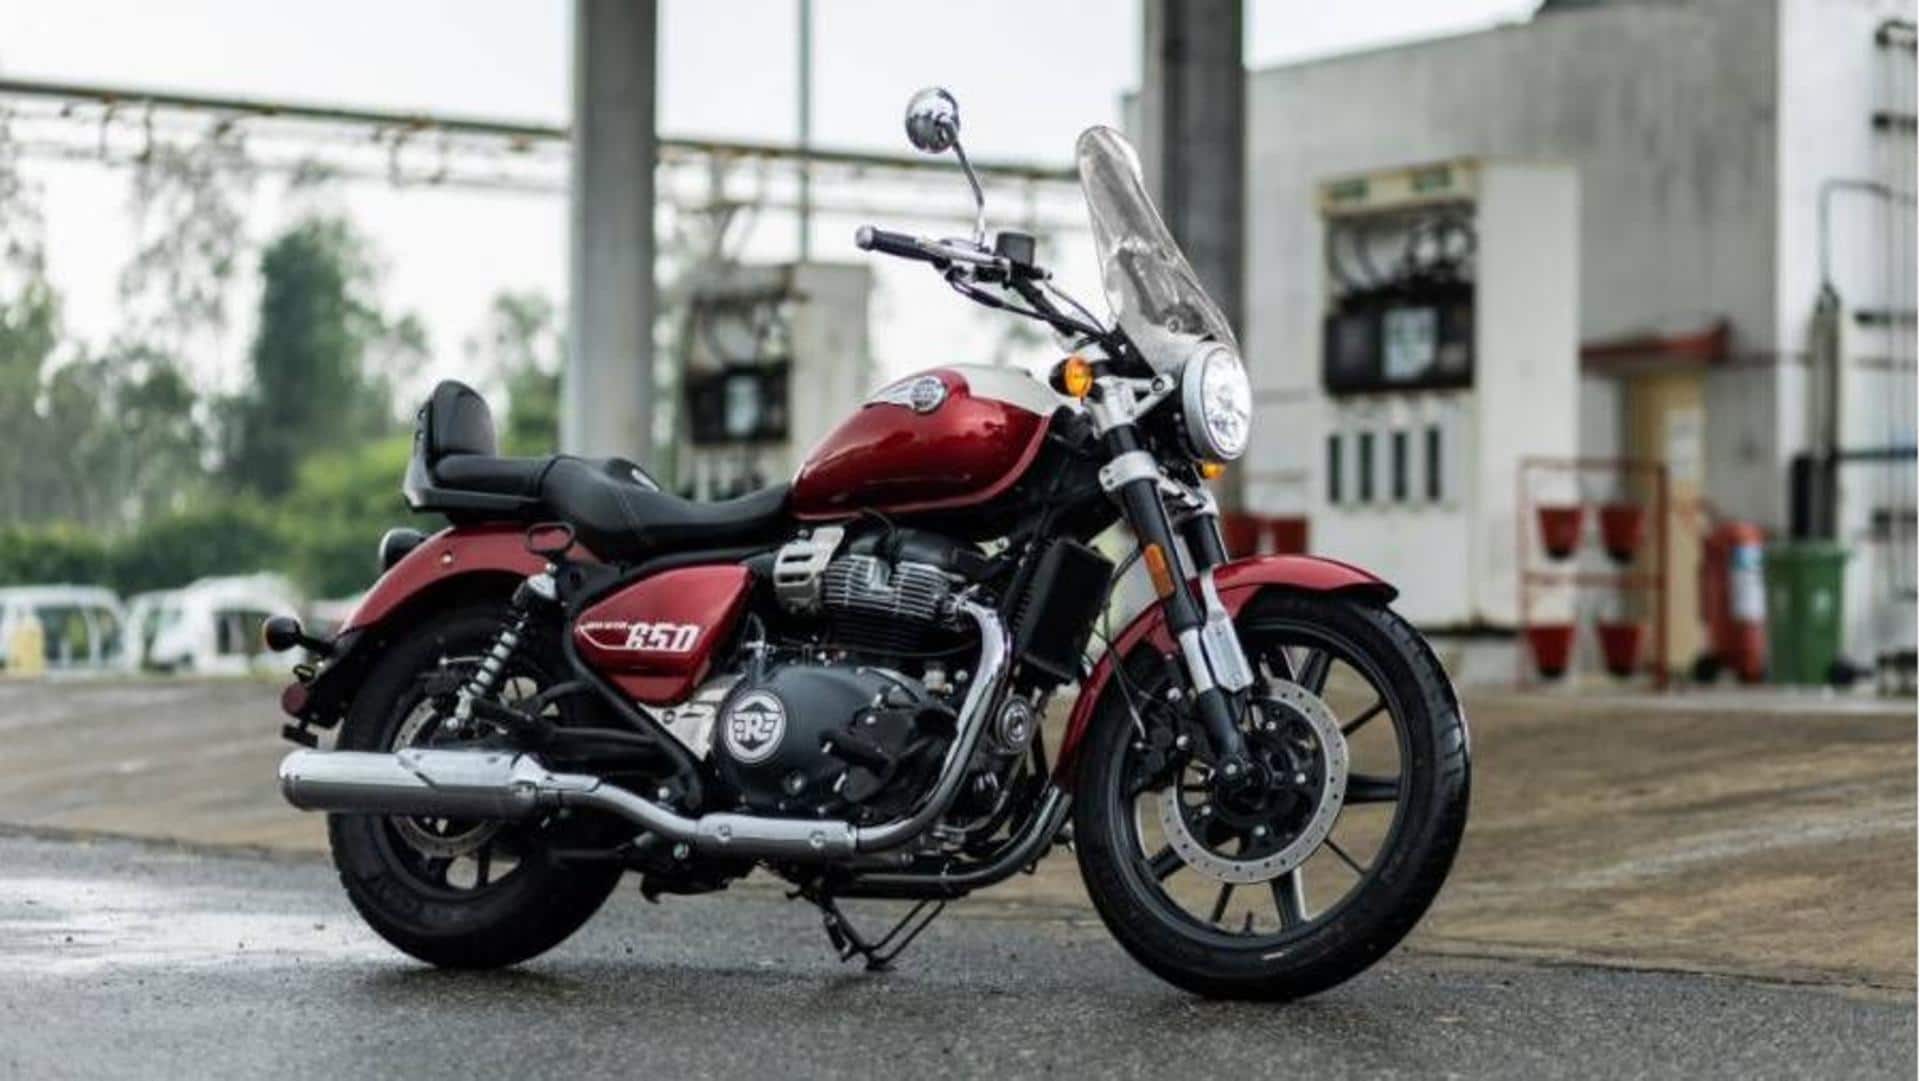 Royal Enfield Super Meteor 650: Which variant offers best value